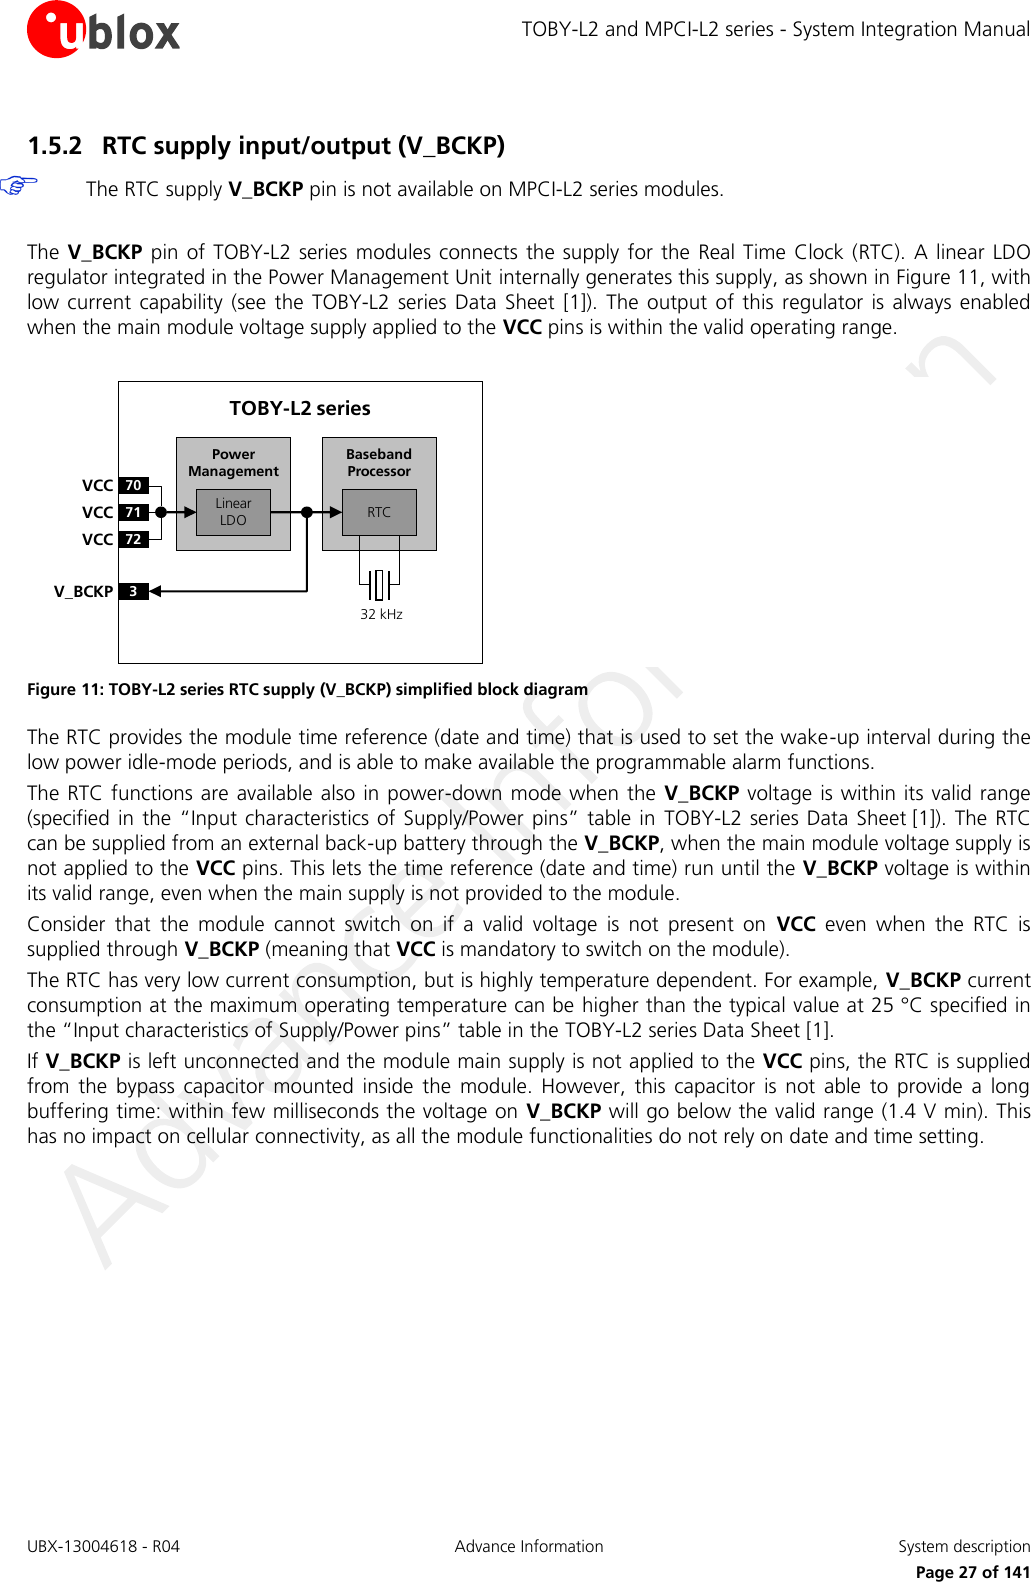 TOBY-L2 and MPCI-L2 series - System Integration Manual UBX-13004618 - R04  Advance Information  System description     Page 27 of 141 1.5.2 RTC supply input/output (V_BCKP)   The RTC supply V_BCKP pin is not available on MPCI-L2 series modules.  The V_BCKP  pin  of  TOBY-L2 series  modules connects  the supply for the  Real Time Clock (RTC). A linear LDO regulator integrated in the Power Management Unit internally generates this supply, as shown in Figure 11, with low current  capability  (see  the  TOBY-L2  series  Data  Sheet  [1]).  The  output  of  this  regulator  is  always  enabled when the main module voltage supply applied to the VCC pins is within the valid operating range.  Baseband Processor70VCC71VCC72VCC3V_BCKPLinear LDOPower ManagementTOBY-L2 series32 kHzRTC Figure 11: TOBY-L2 series RTC supply (V_BCKP) simplified block diagram The RTC provides the module time reference (date and time) that is used to set the wake-up interval during the low power idle-mode periods, and is able to make available the programmable alarm functions. The RTC functions are available also in power-down  mode  when  the  V_BCKP  voltage is within its  valid range (specified in the “Input characteristics of  Supply/Power pins” table in  TOBY-L2  series Data Sheet [1]). The  RTC can be supplied from an external back-up battery through the V_BCKP, when the main module voltage supply is not applied to the VCC pins. This lets the time reference (date and time) run until the V_BCKP voltage is within its valid range, even when the main supply is not provided to the module. Consider  that  the  module  cannot  switch  on  if  a  valid  voltage  is  not  present  on  VCC  even  when  the  RTC  is supplied through V_BCKP (meaning that VCC is mandatory to switch on the module). The RTC has very low current consumption, but is highly temperature dependent. For example, V_BCKP current consumption at the maximum operating temperature can be higher than the typical value at 25 °C specified in the “Input characteristics of Supply/Power pins” table in the TOBY-L2 series Data Sheet [1]. If V_BCKP is left unconnected and the module main supply is not applied to the VCC pins, the RTC is supplied from  the  bypass  capacitor  mounted  inside  the  module.  However,  this  capacitor  is  not  able  to  provide  a  long buffering time: within few milliseconds the voltage on V_BCKP will go below the valid range (1.4 V min). This has no impact on cellular connectivity, as all the module functionalities do not rely on date and time setting.  